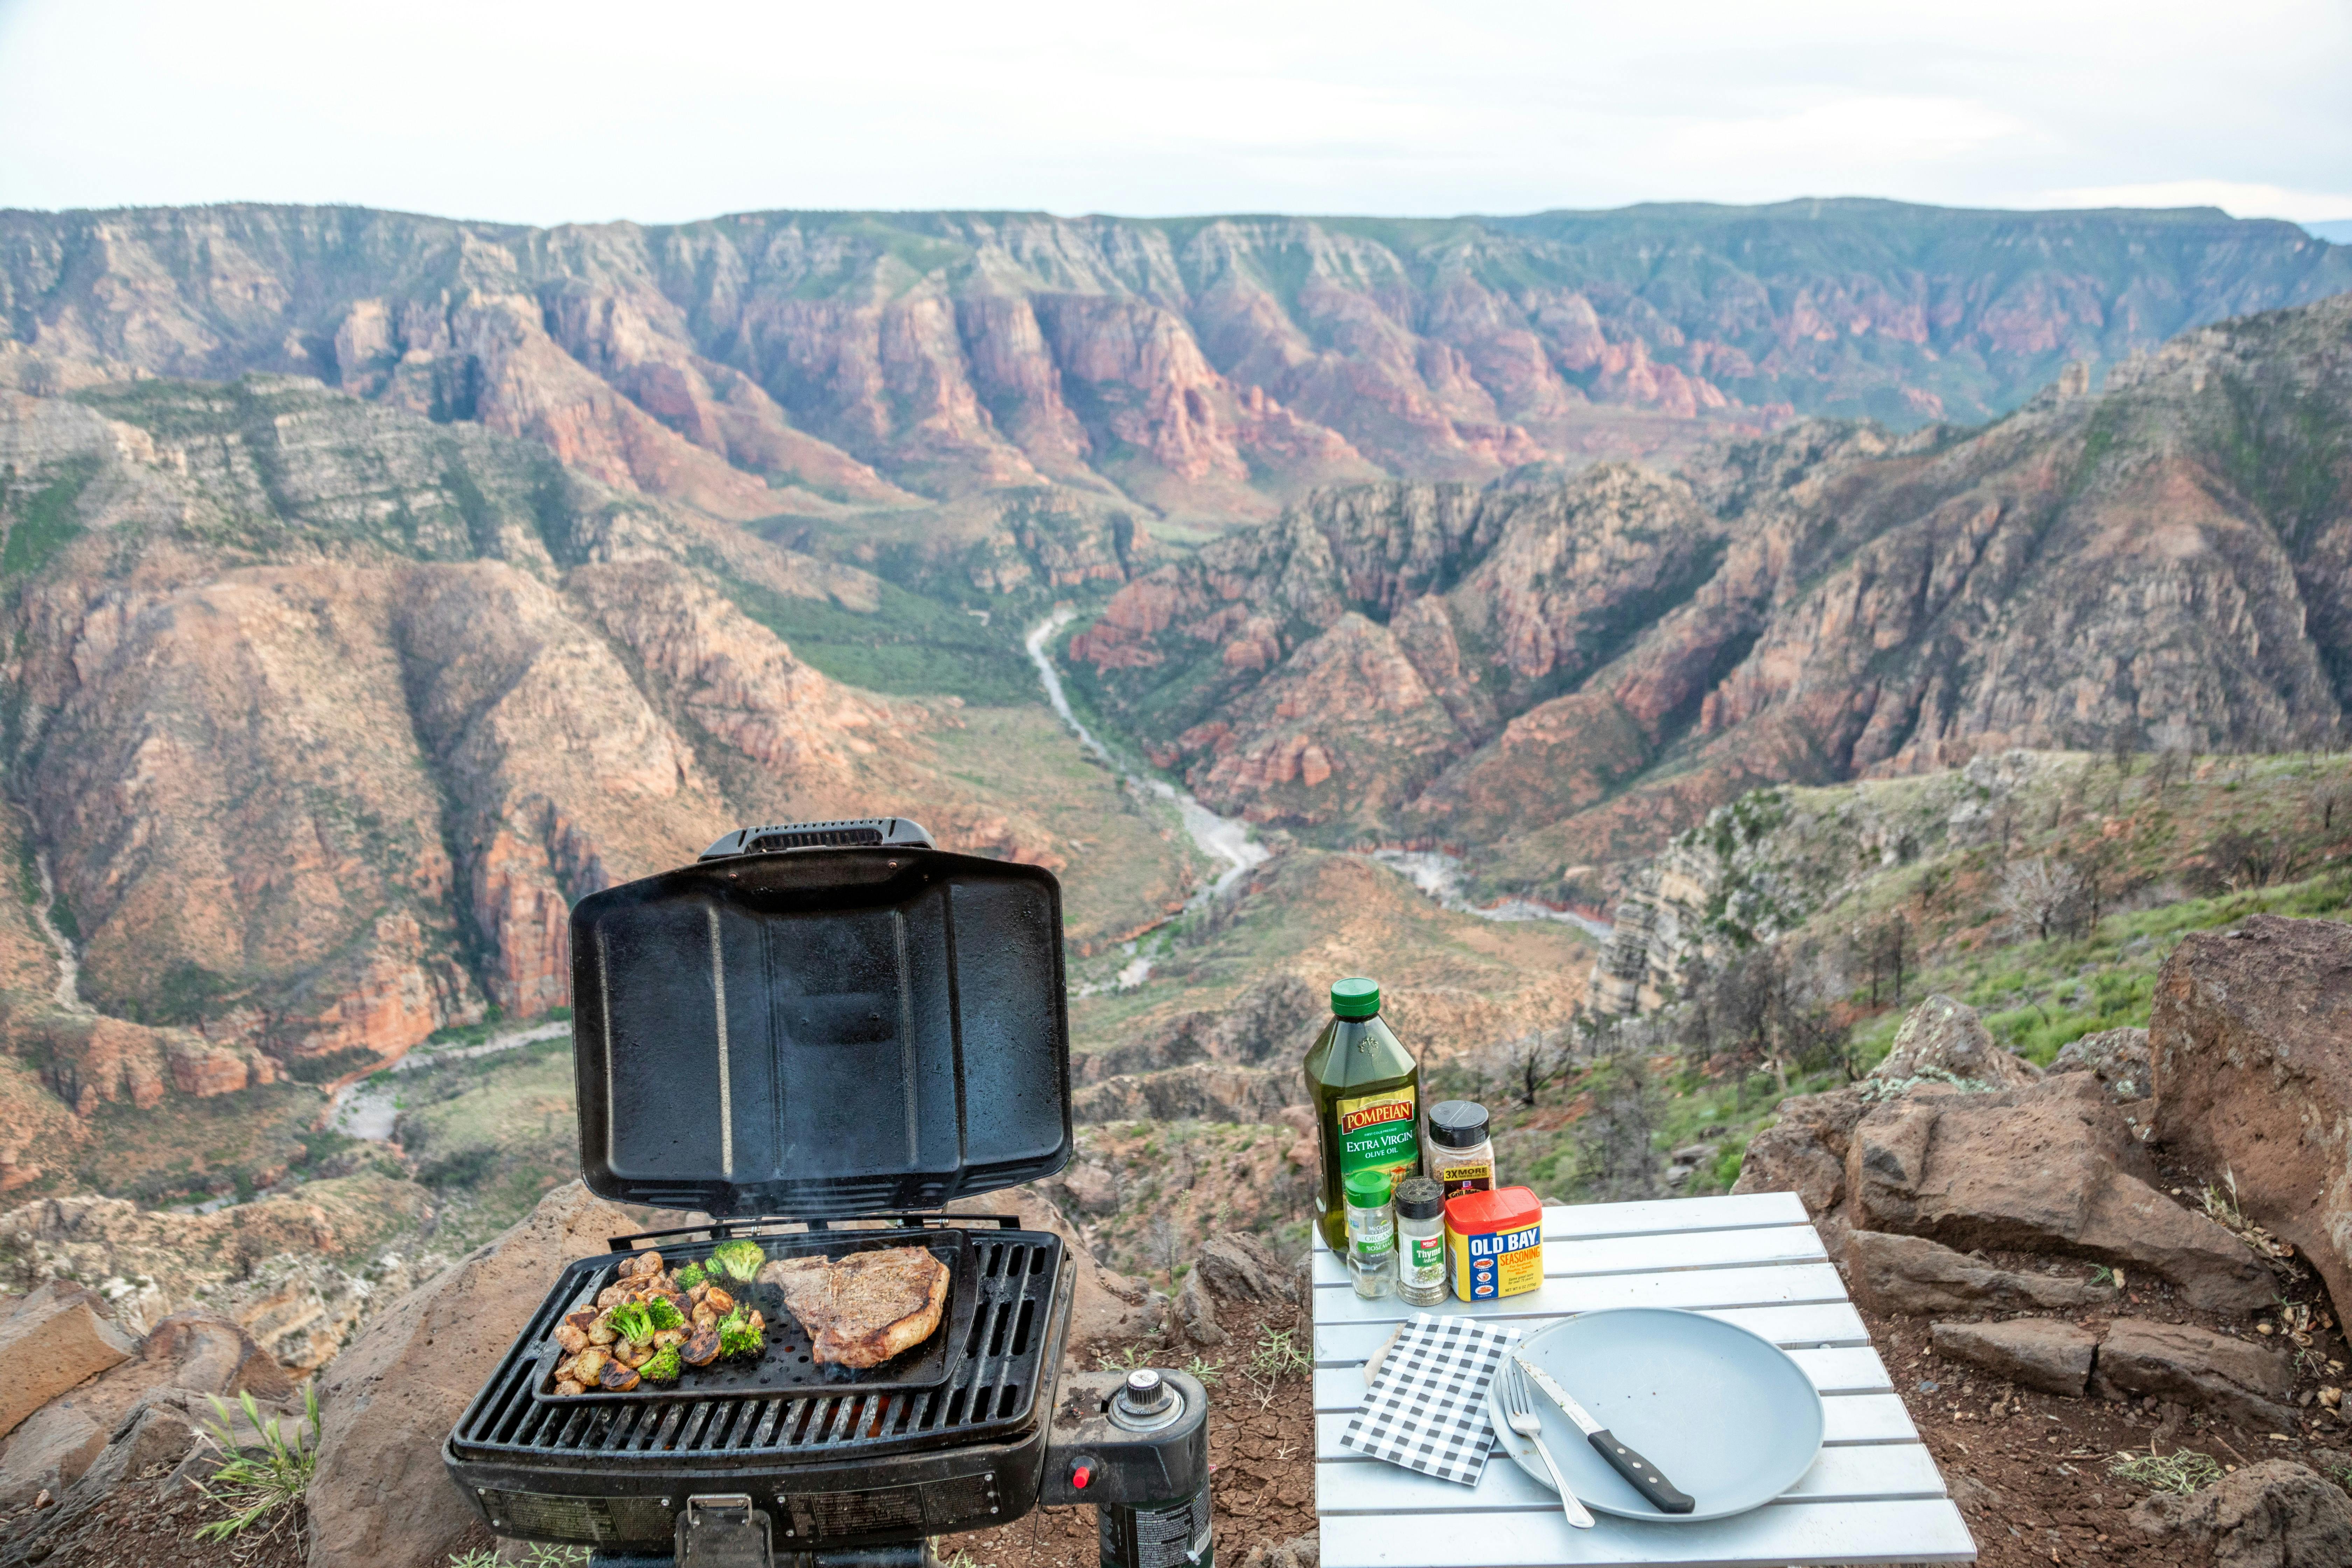 Jeff Poe grilling at an overlook in Kaibab National Forest